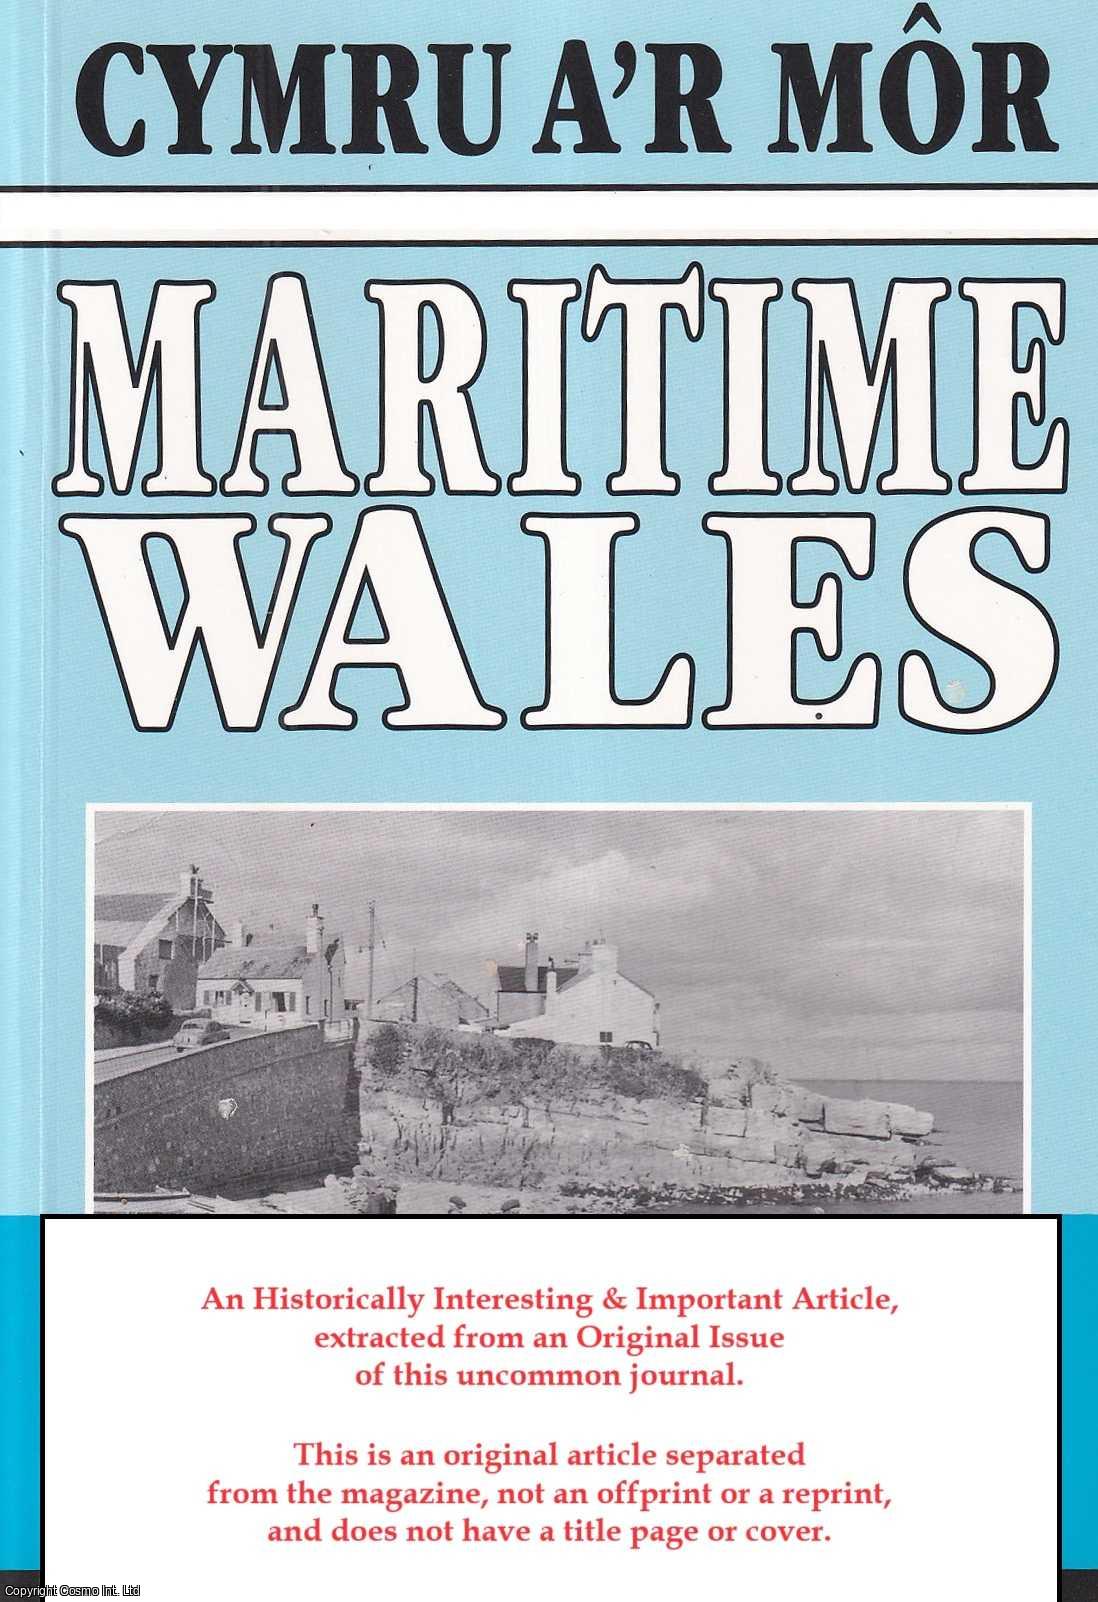 M. K. Stammers - Coasting with The Indorita in 1959. An original article from Maritime Wales, 2005.